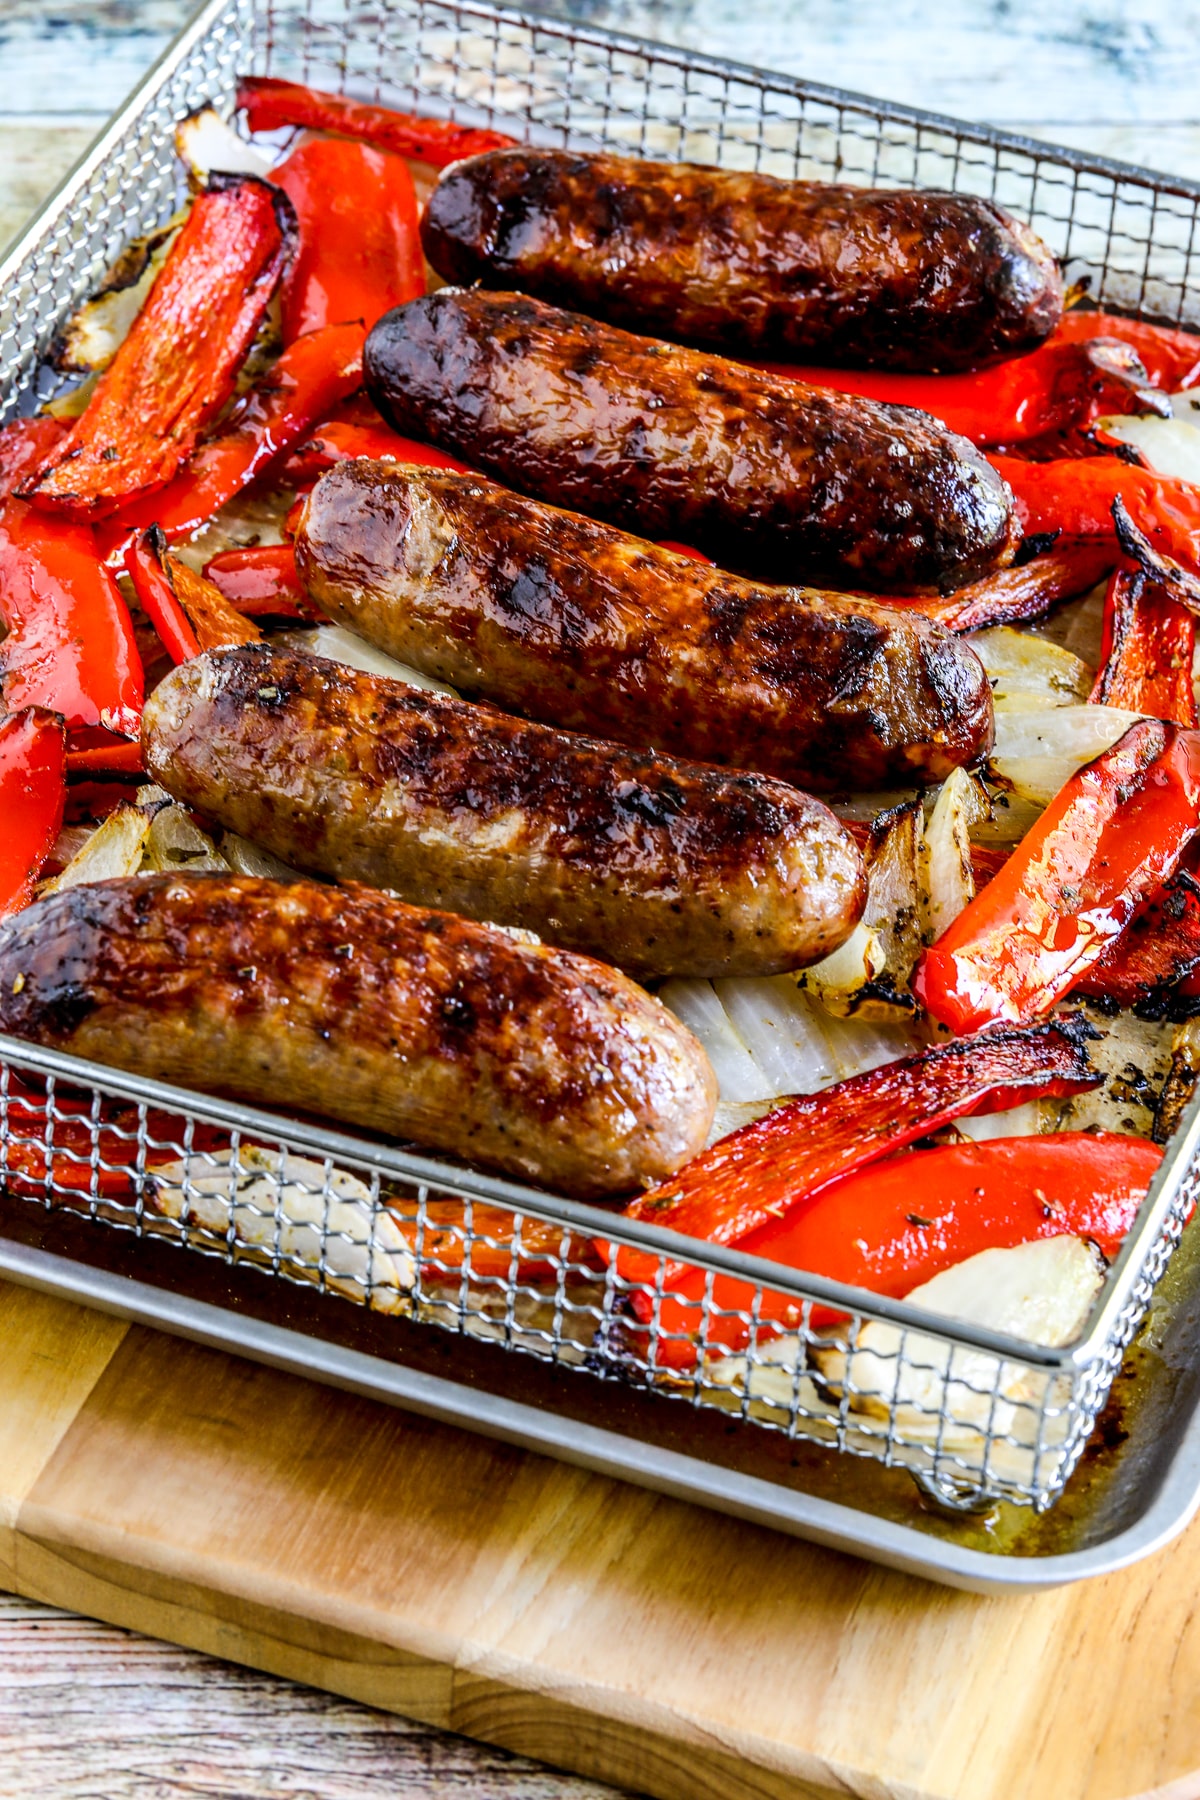 Air fryer sausage and peppers shown in the air fryer basket